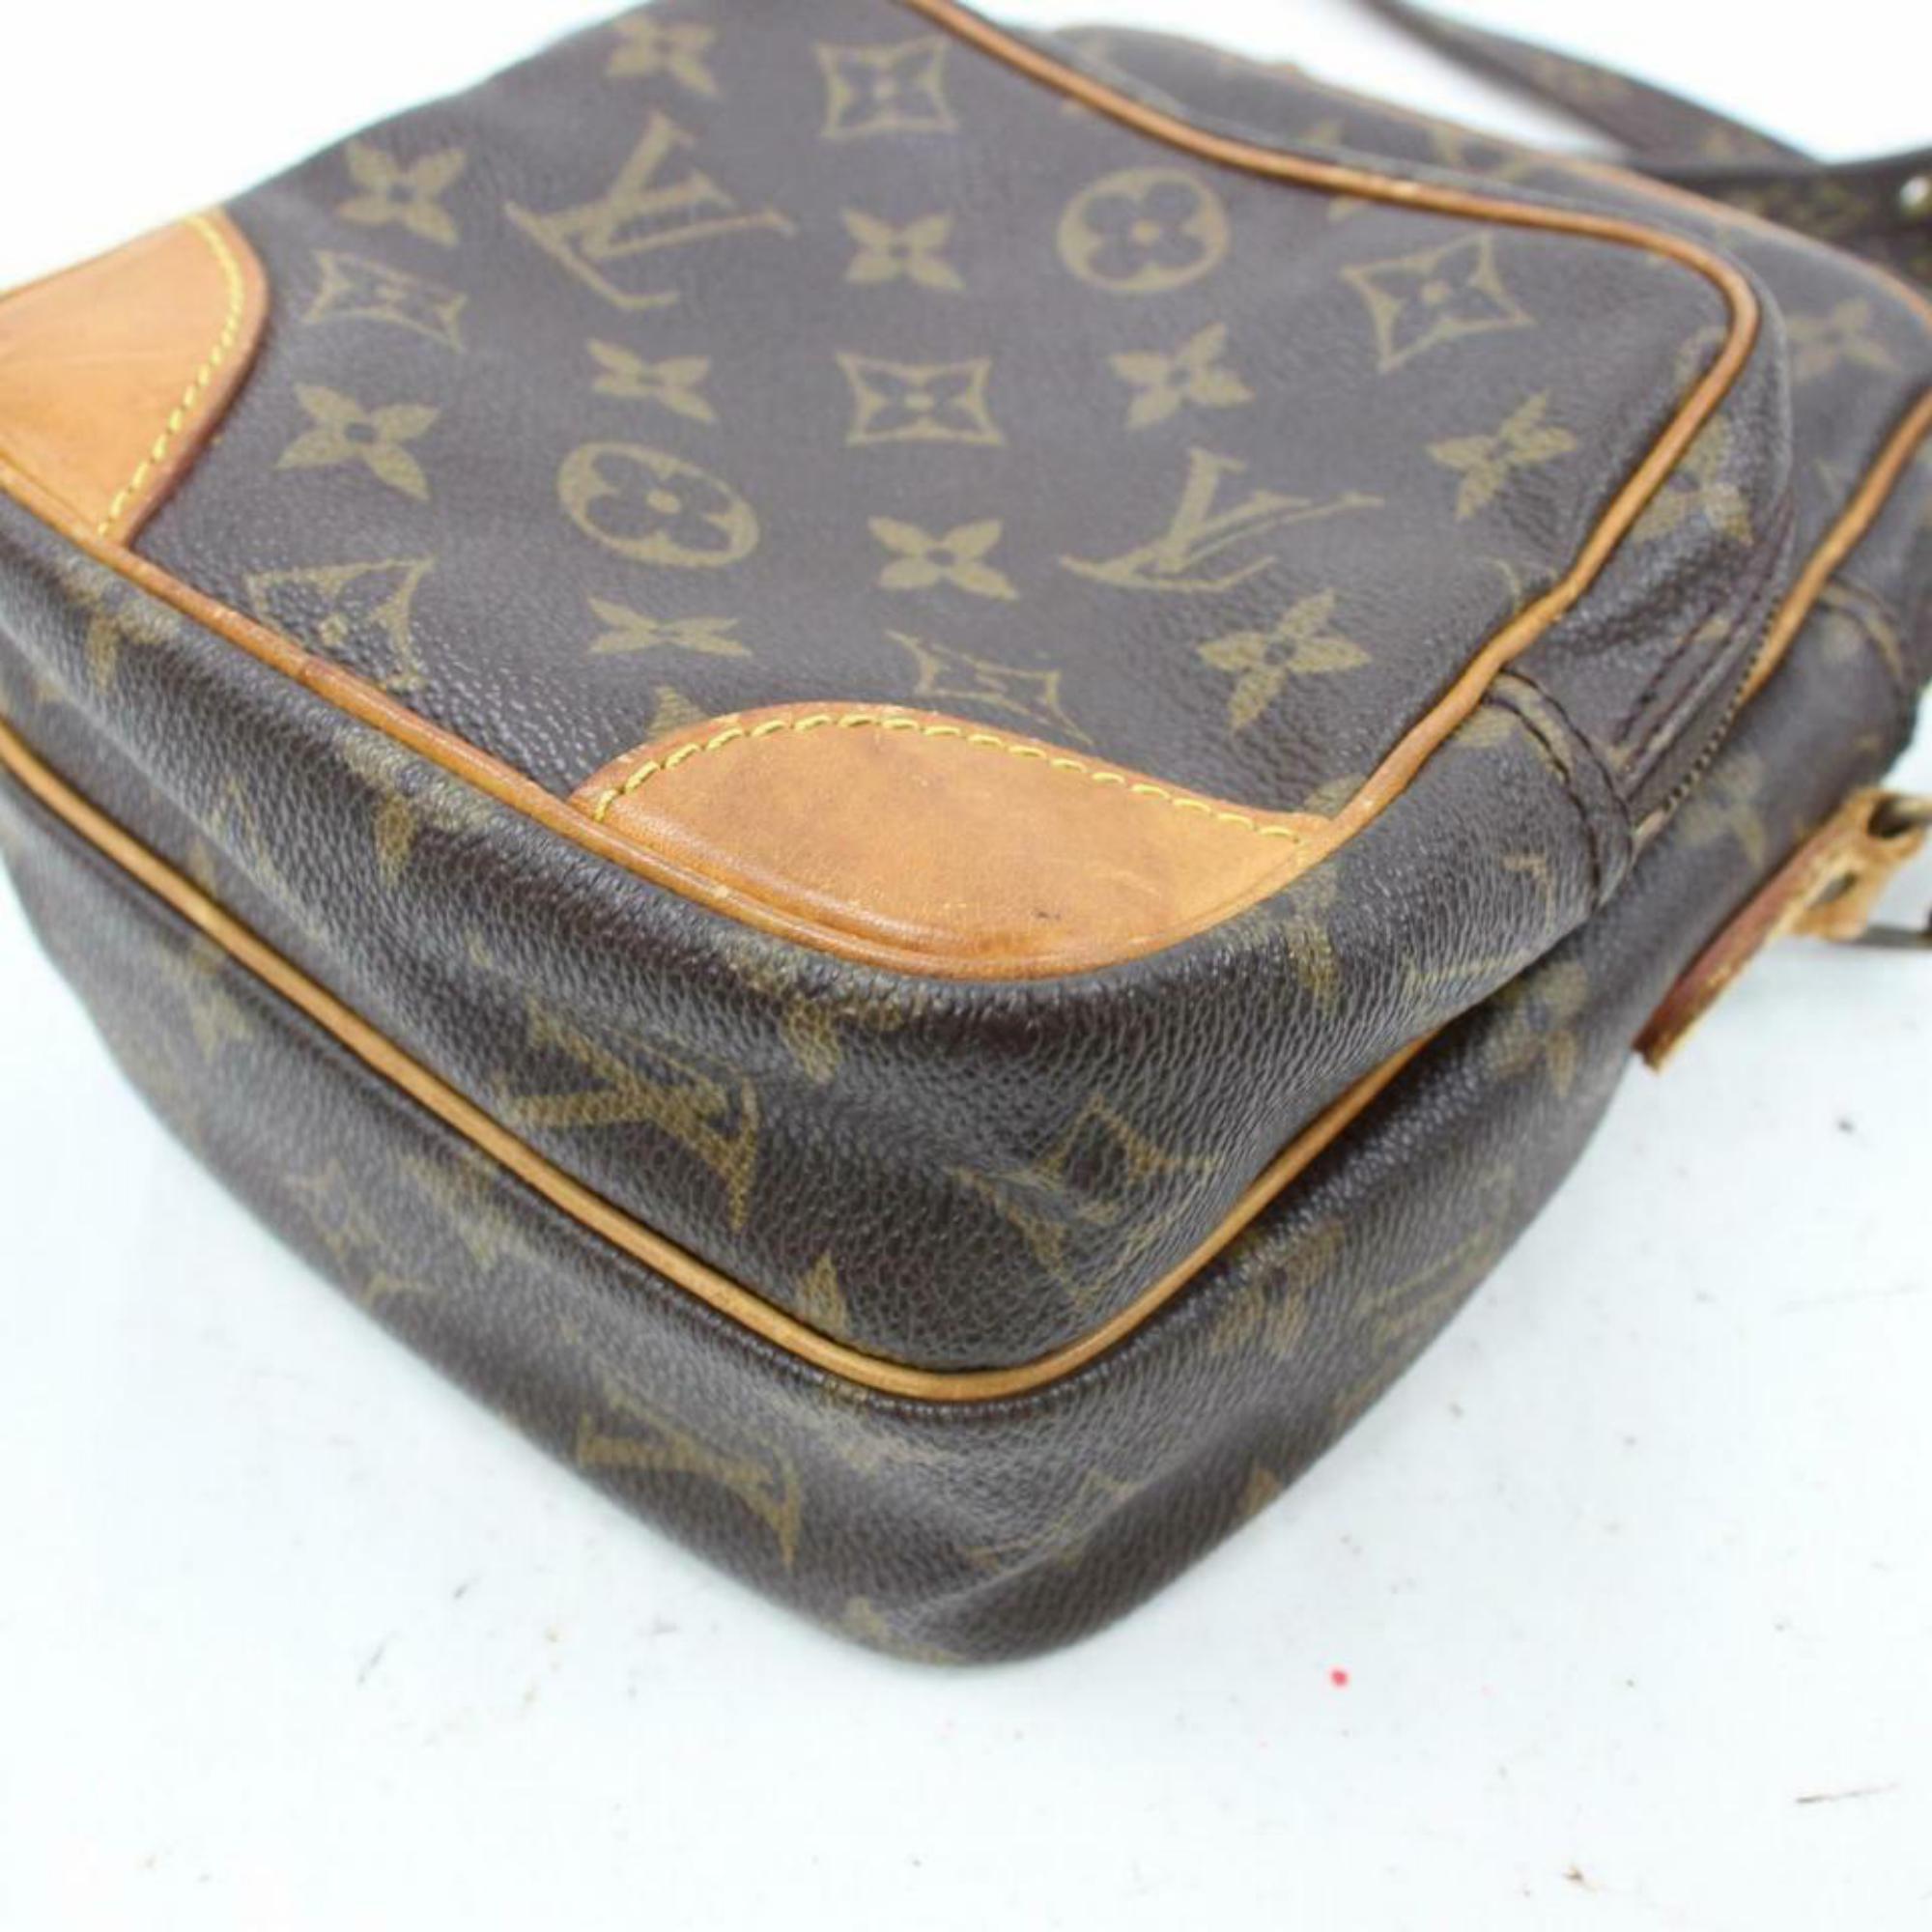 Louis Vuitton Amazon Monogram Camera 870372 Brown Coated Canvas Cross Body Bag In Fair Condition For Sale In Forest Hills, NY